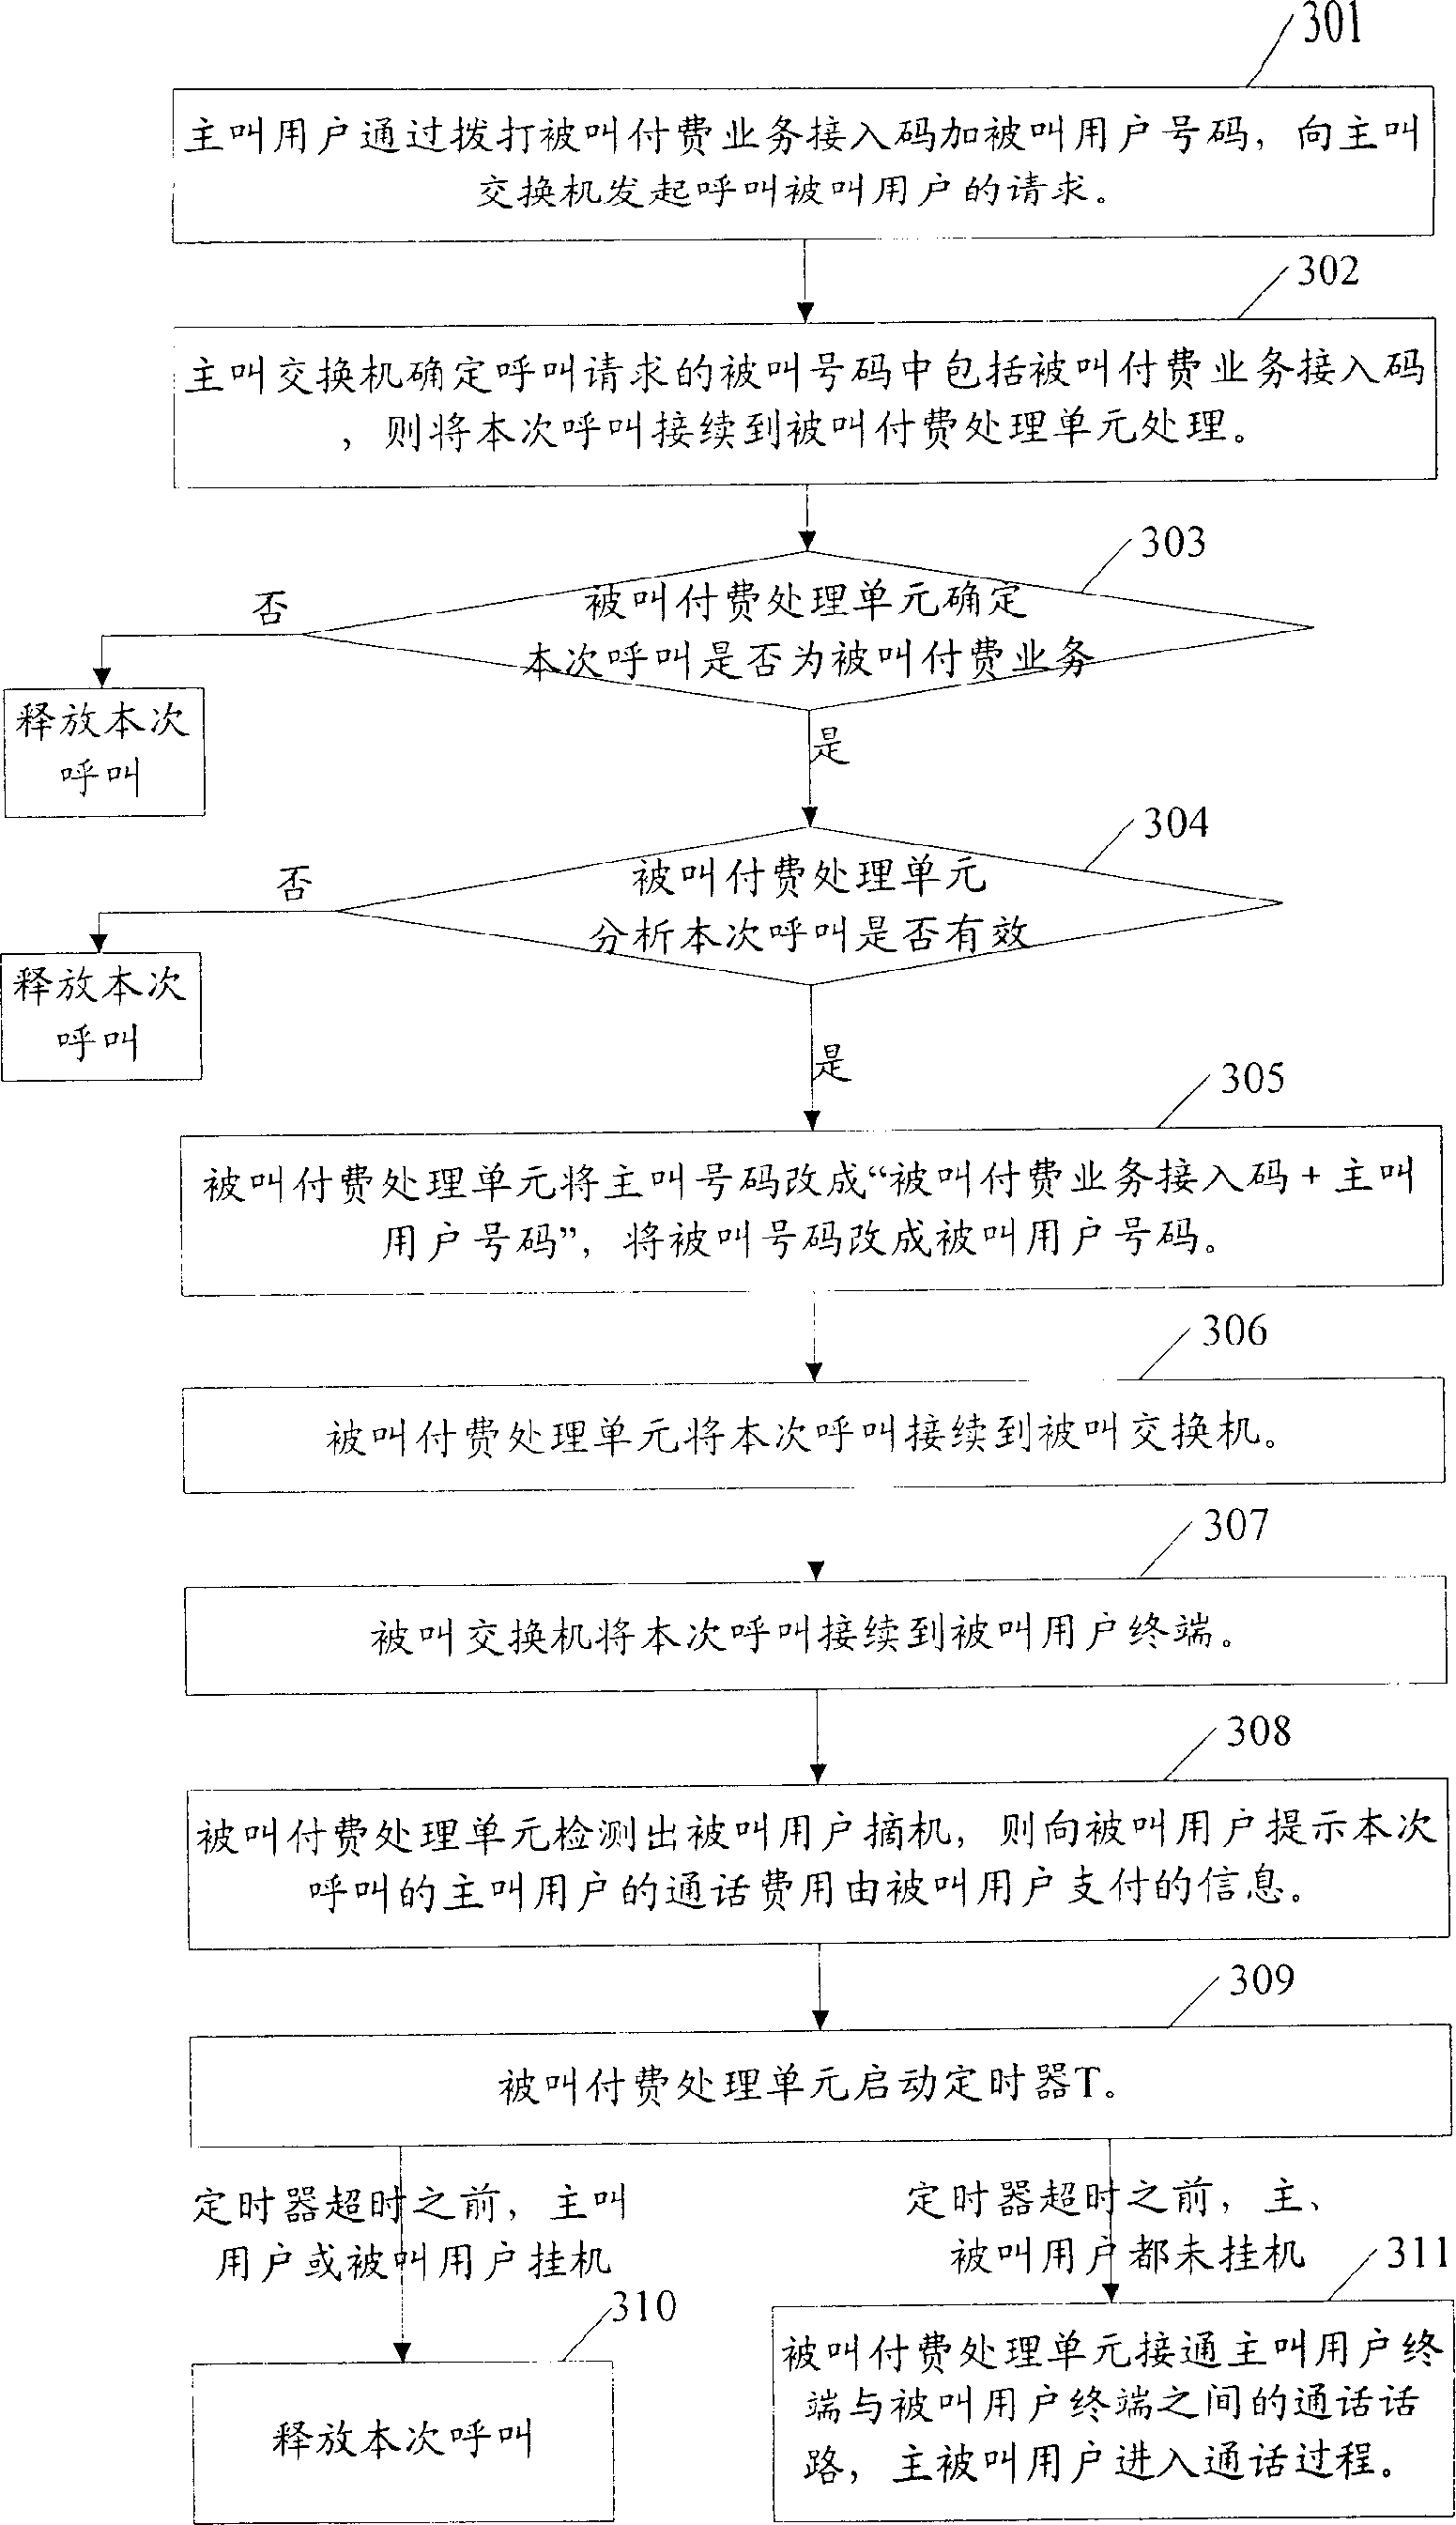 Method and system for implementing called payment service and called payment processor